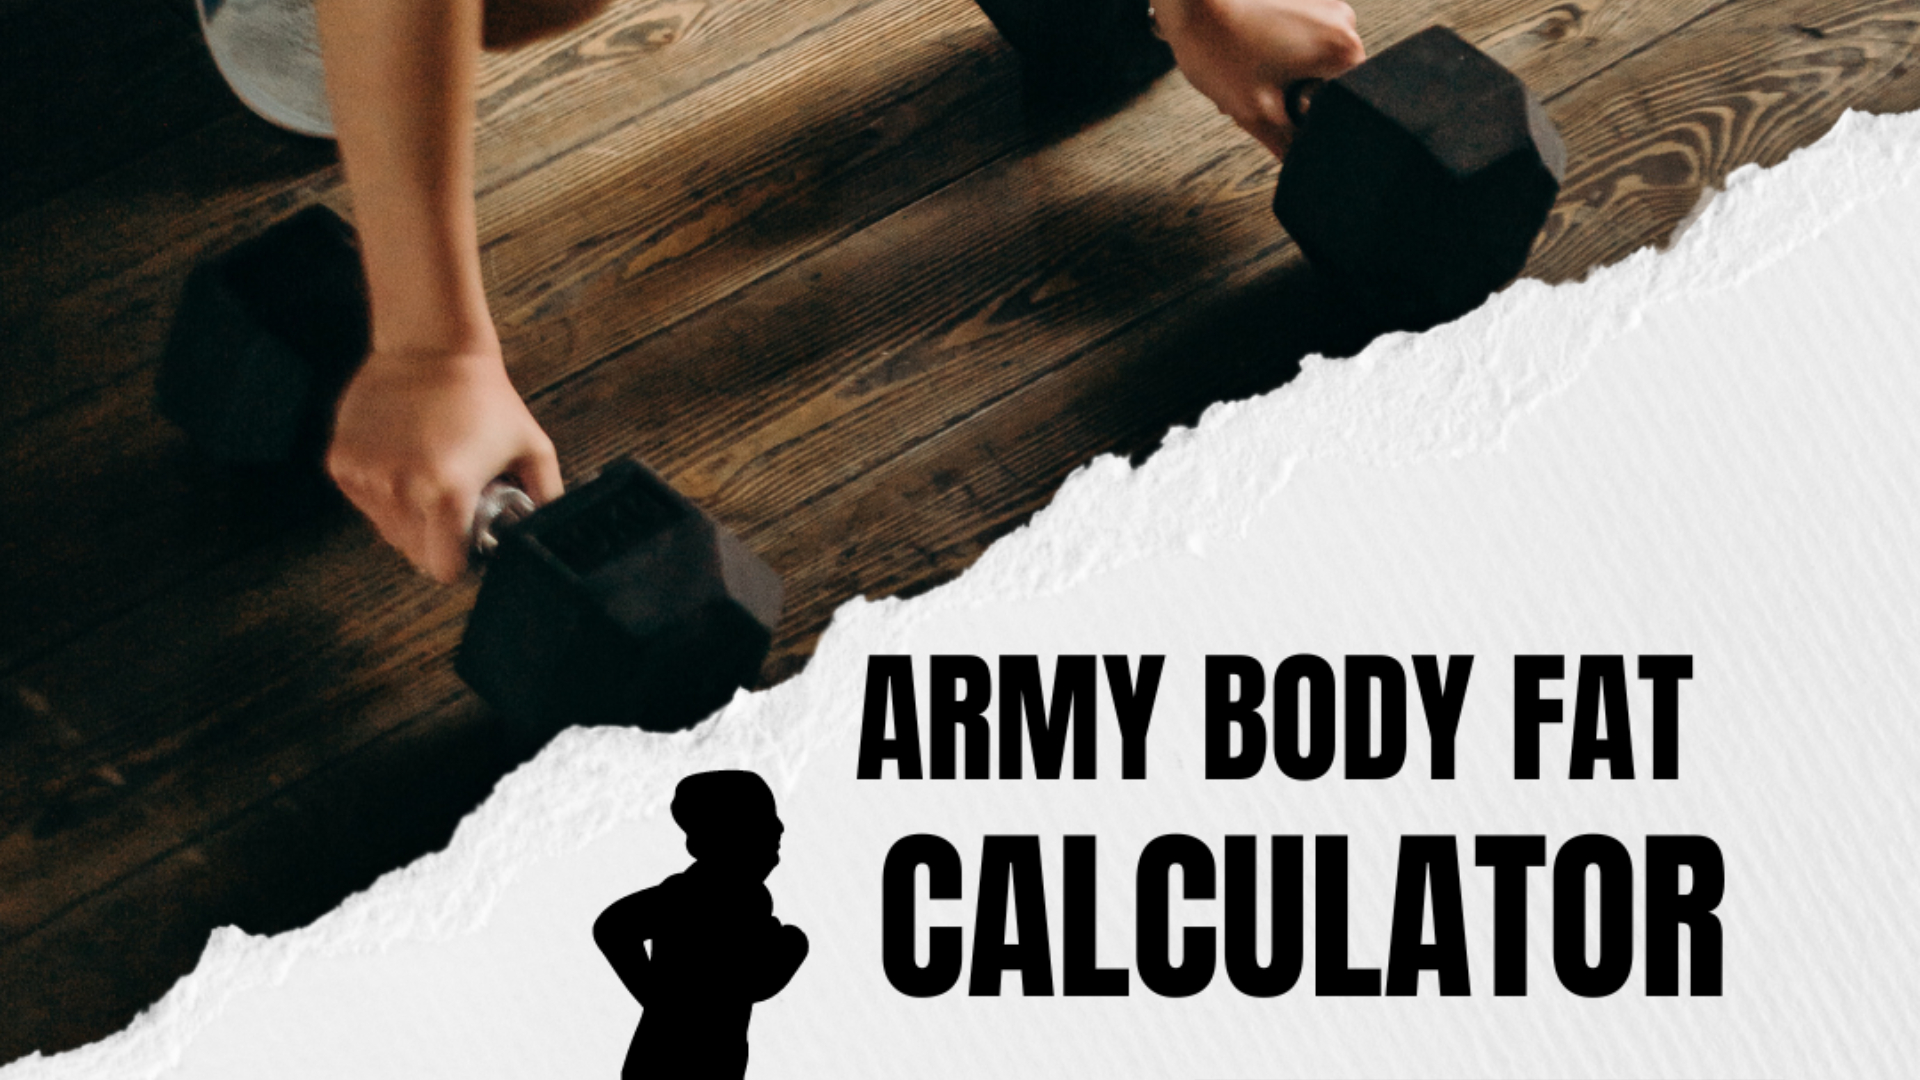 Army Body Fat Calculator Sparks Controversy Over Fitness Standards image